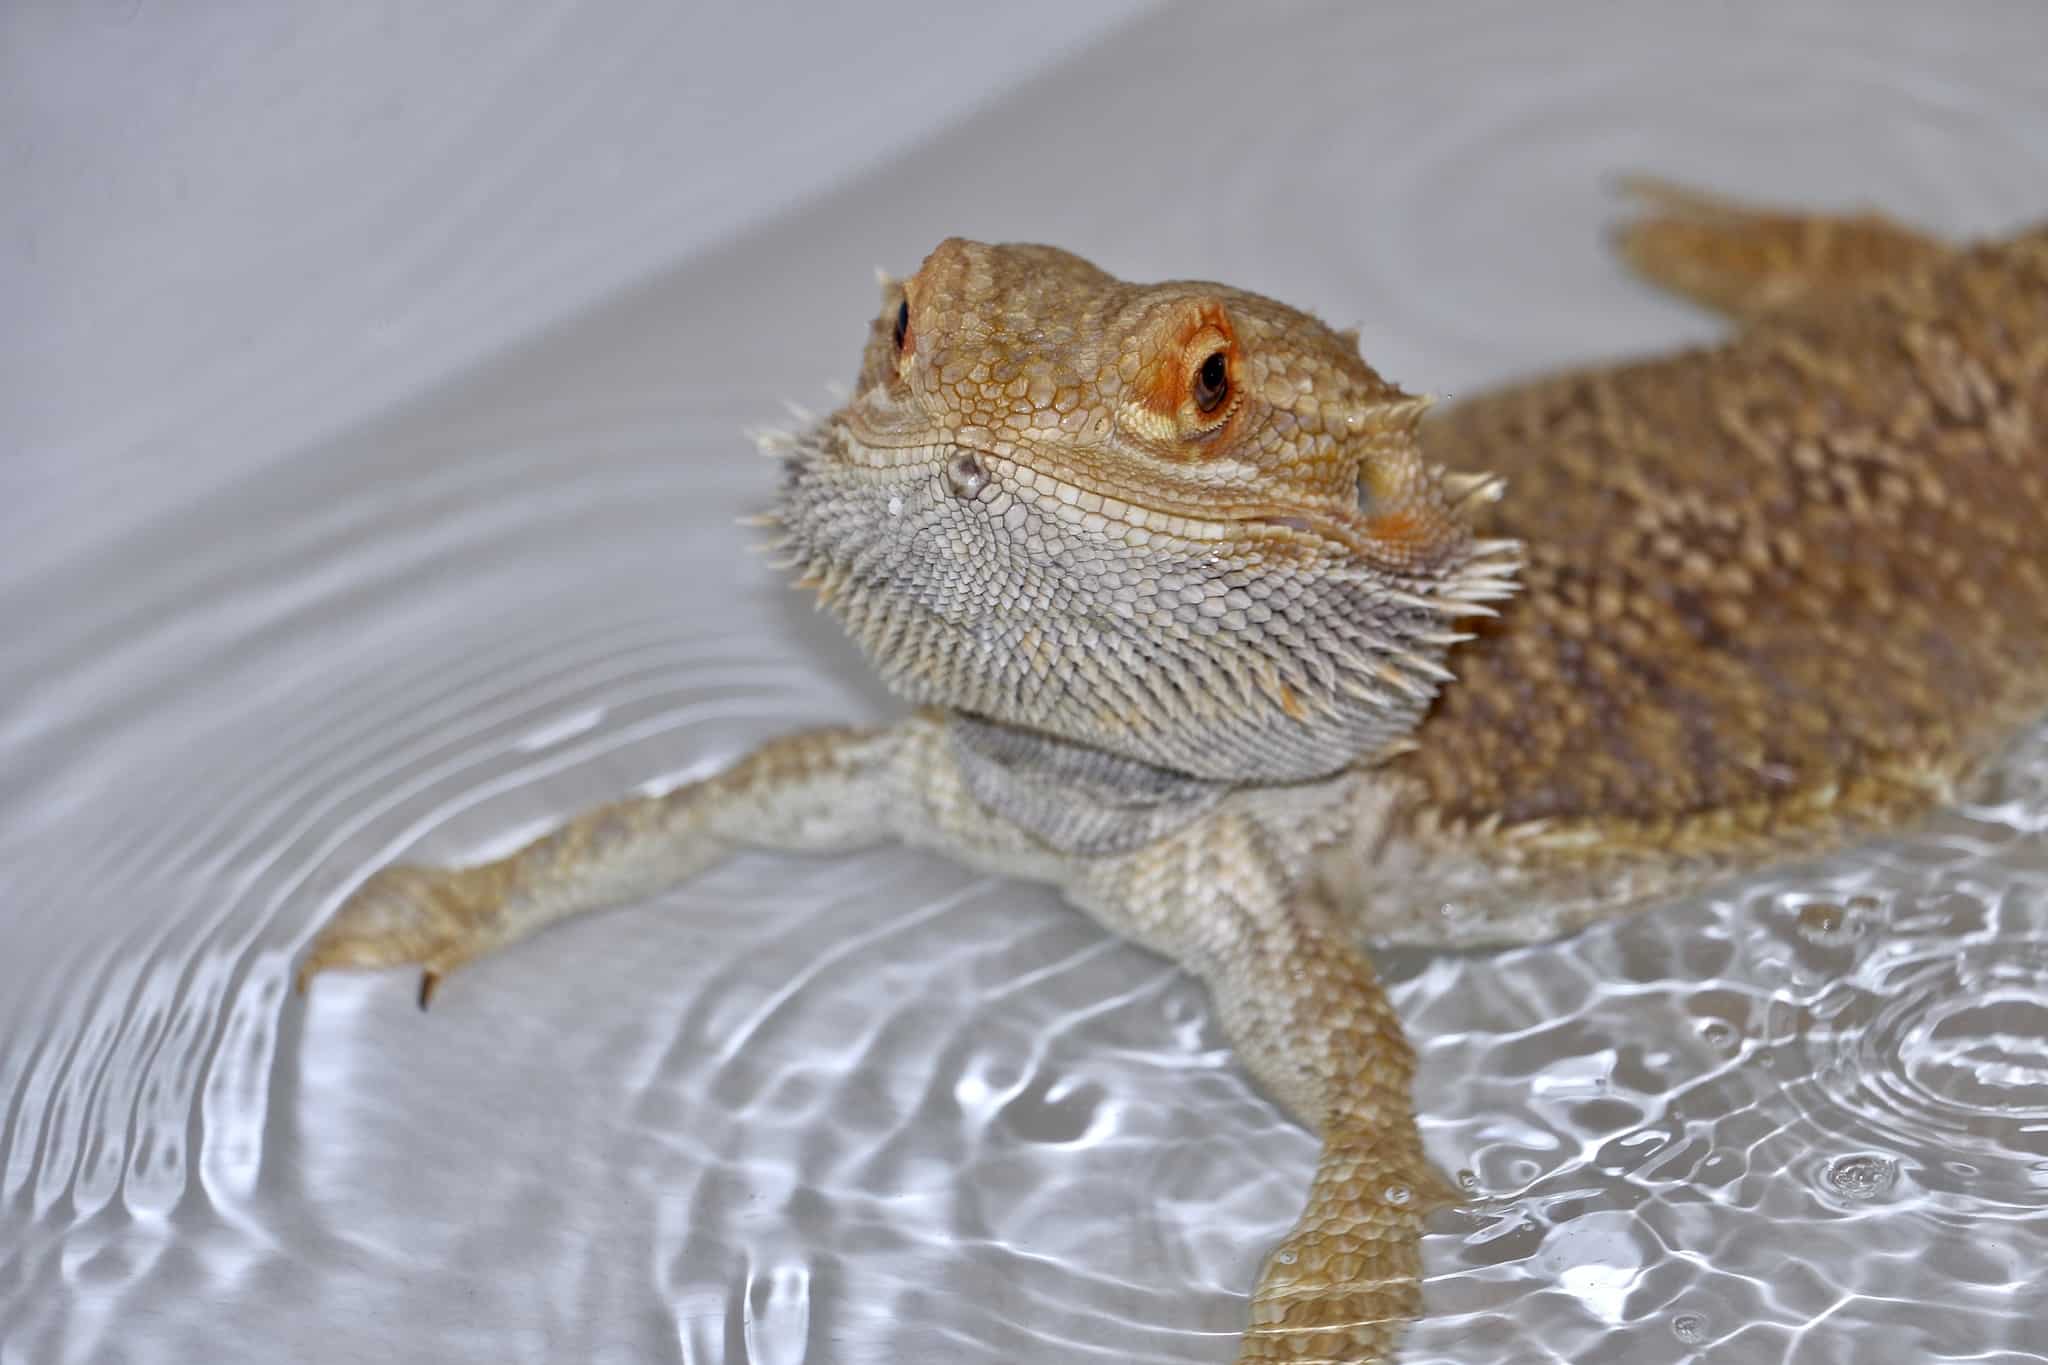 6 things to know about bearded dragons before getting one